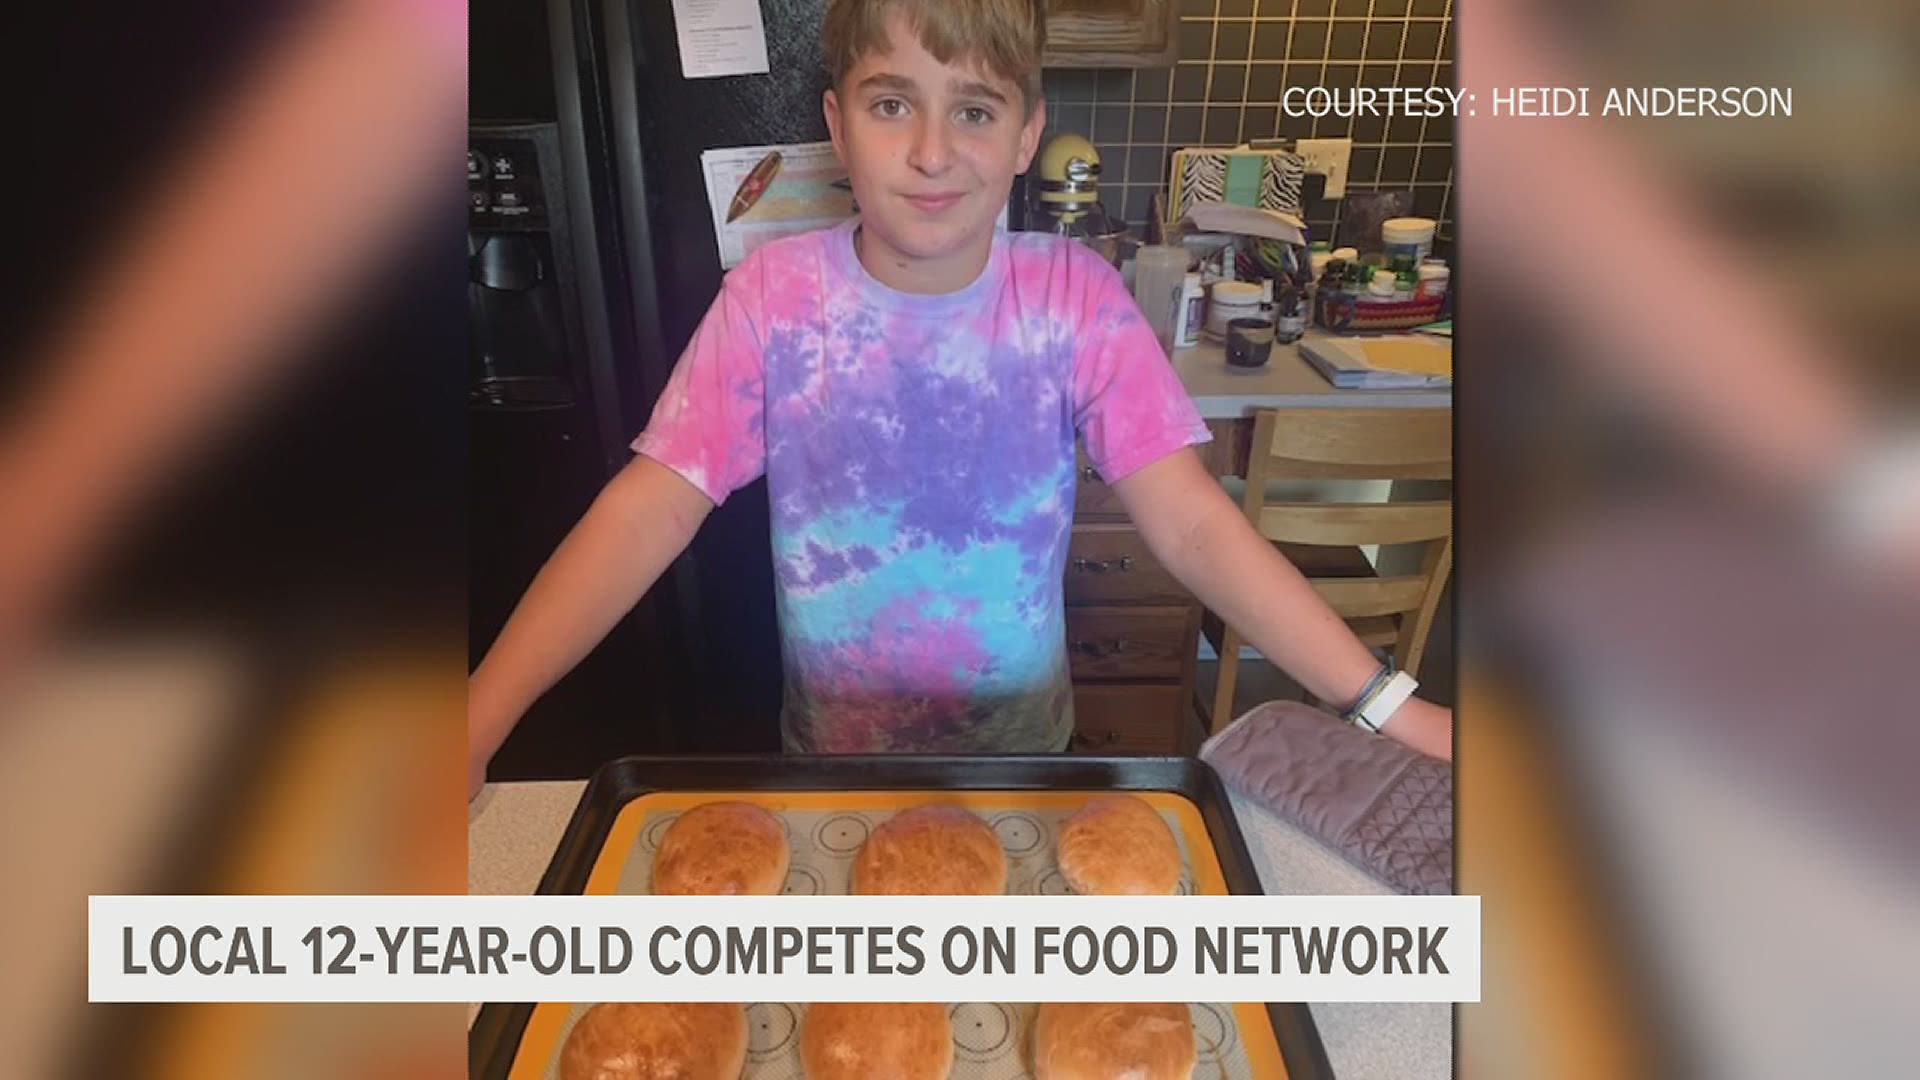 12-year-old Jonah Anderson from Harrisburg said it was an honor to be on the show that inspired him to get into the kitchen and start baking in the first place.